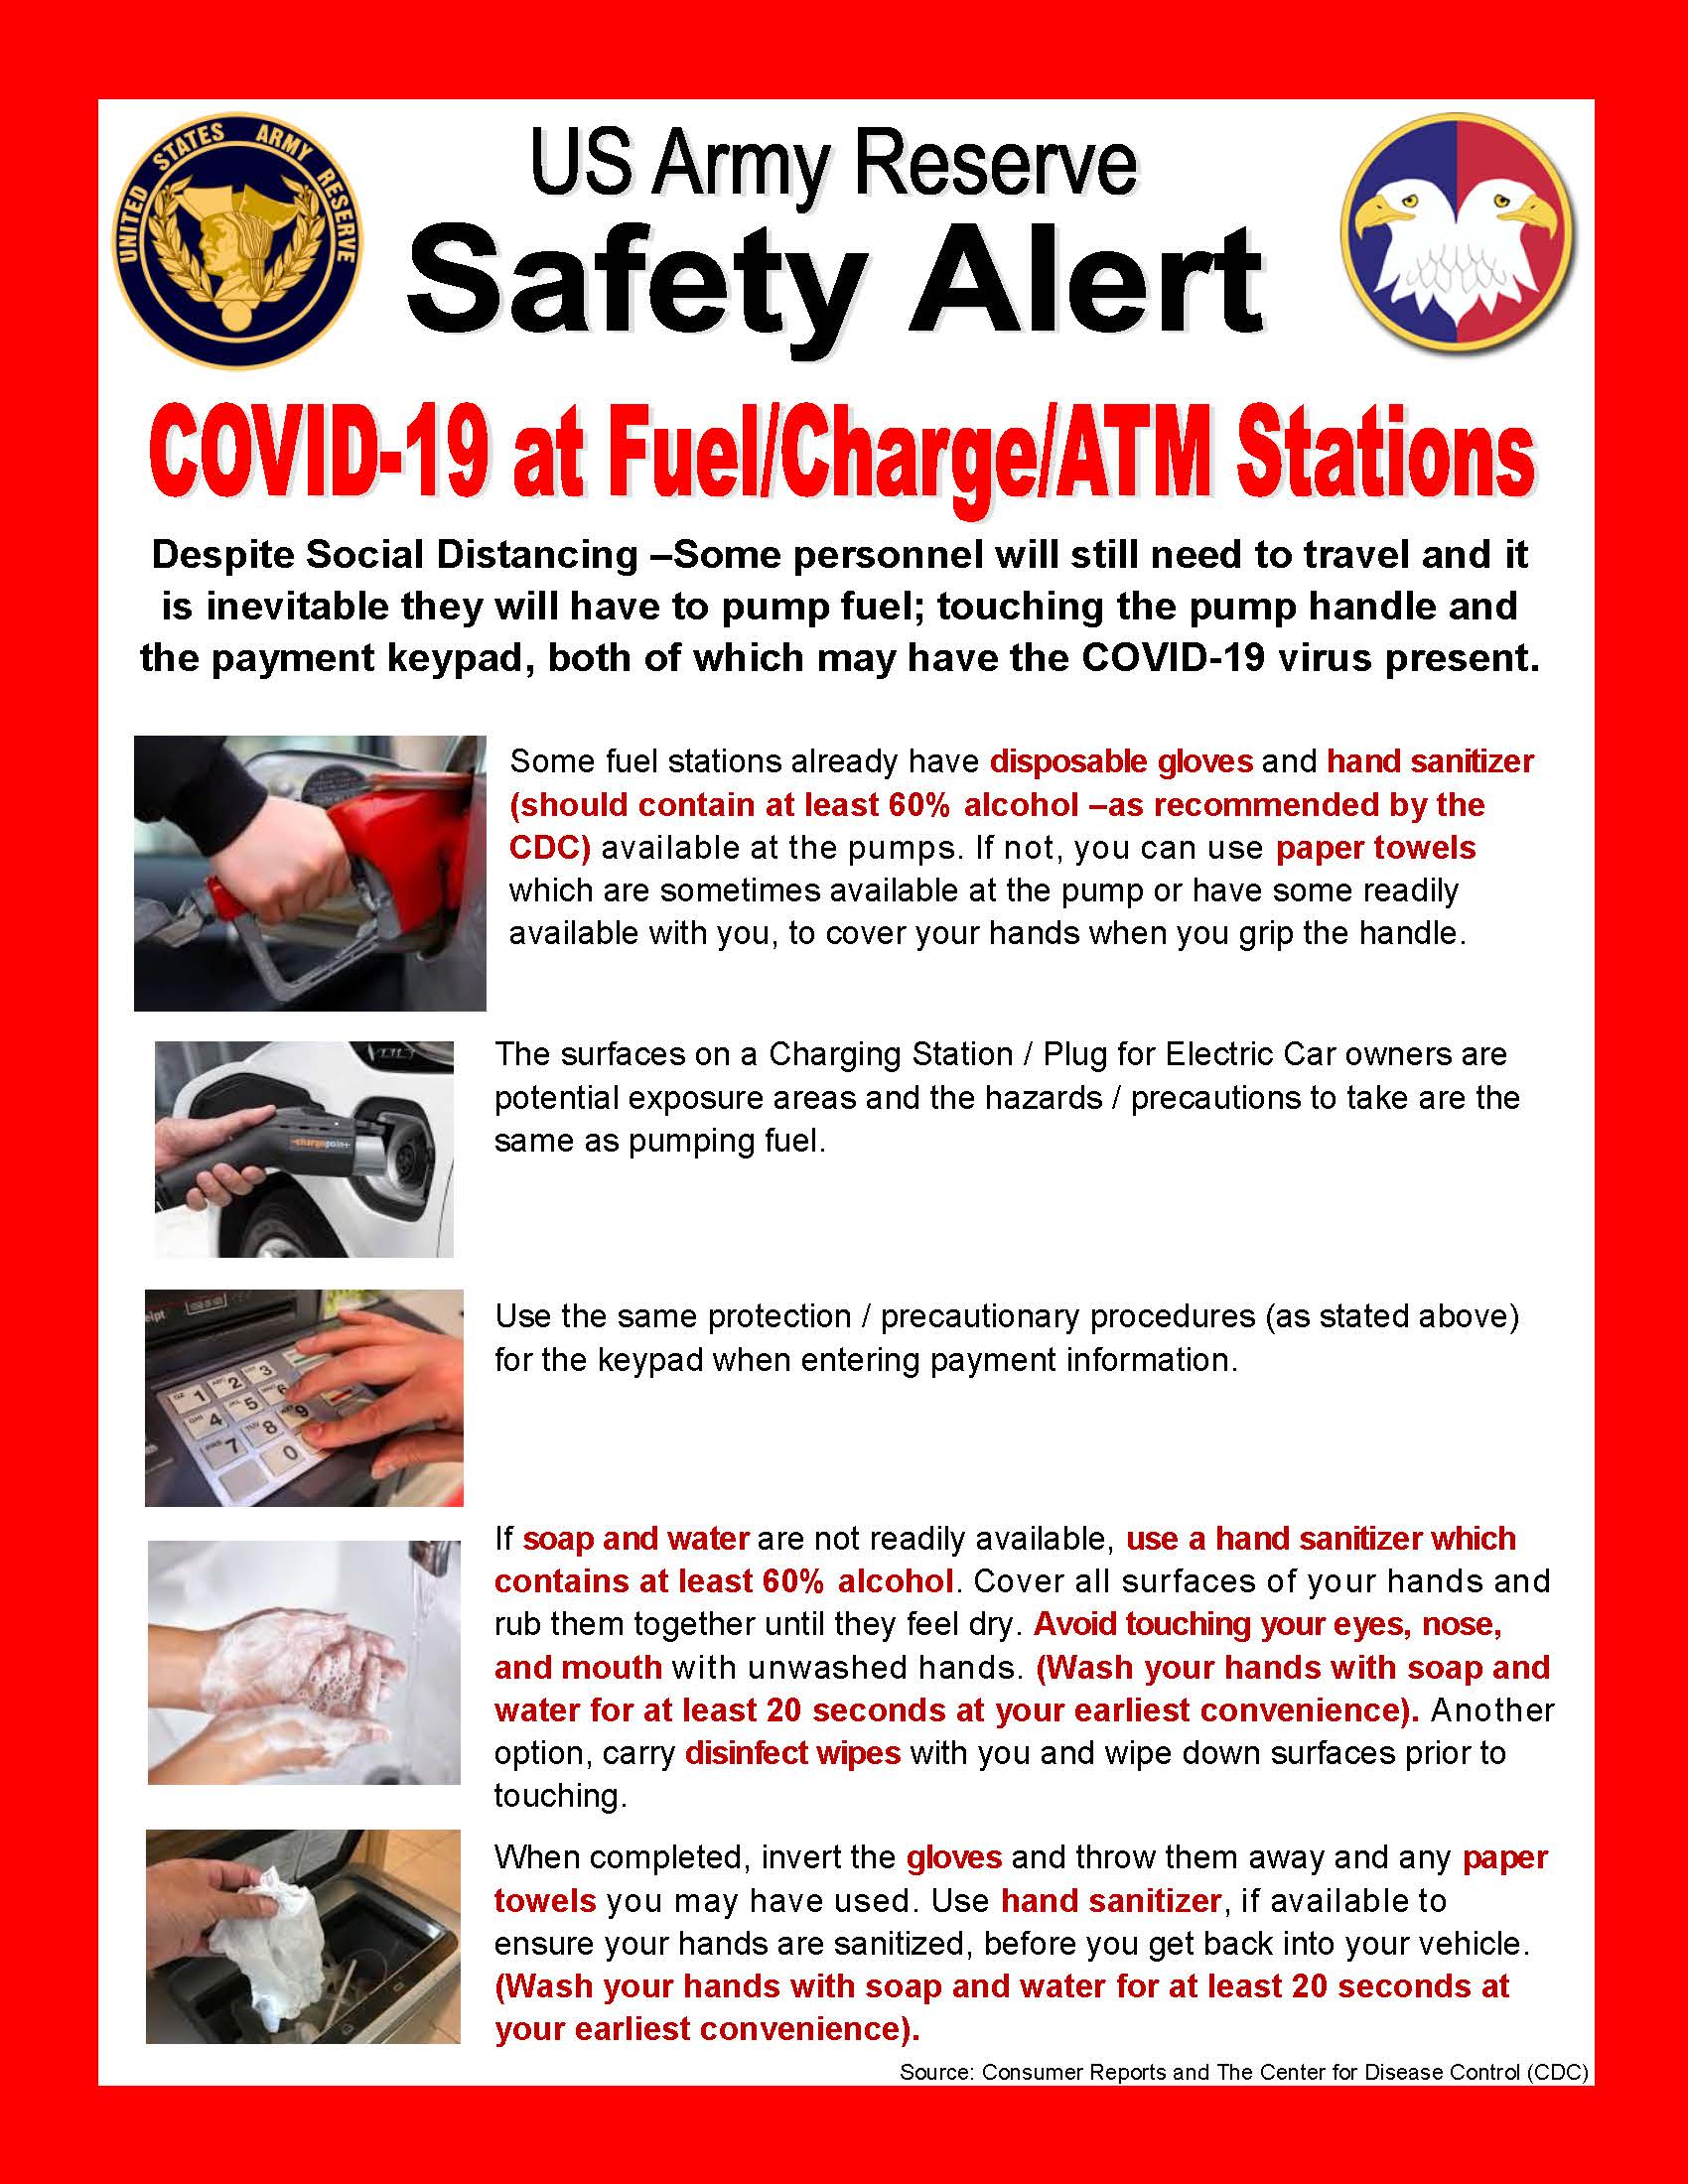 Safety Alert: COVID-19 at Fuel/Charge/ATM Stations